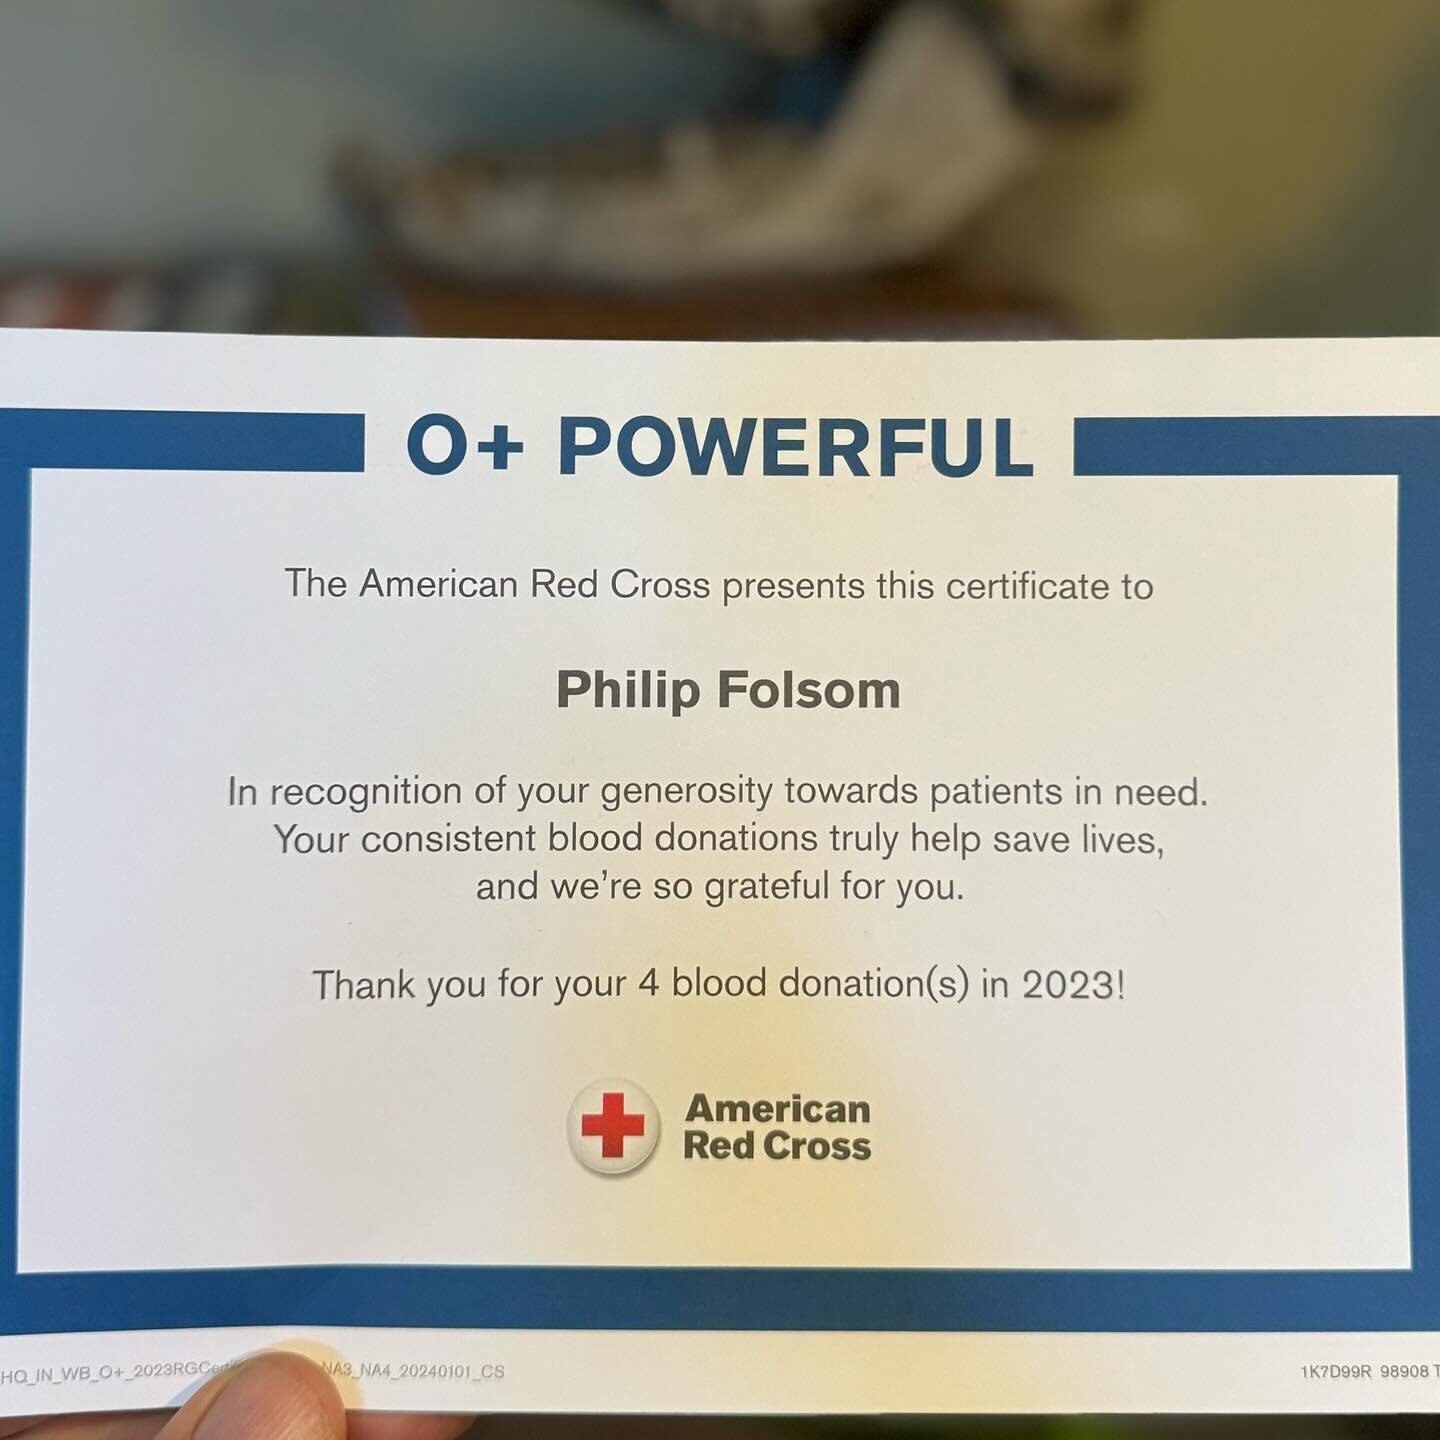 Service one of the three core values of both @k4menswork and the Folsom family.  Service is the source of significant meaning and purpose in life.

Donating blood is one of the many ways we can serve and February is both Lover Archetype month as well